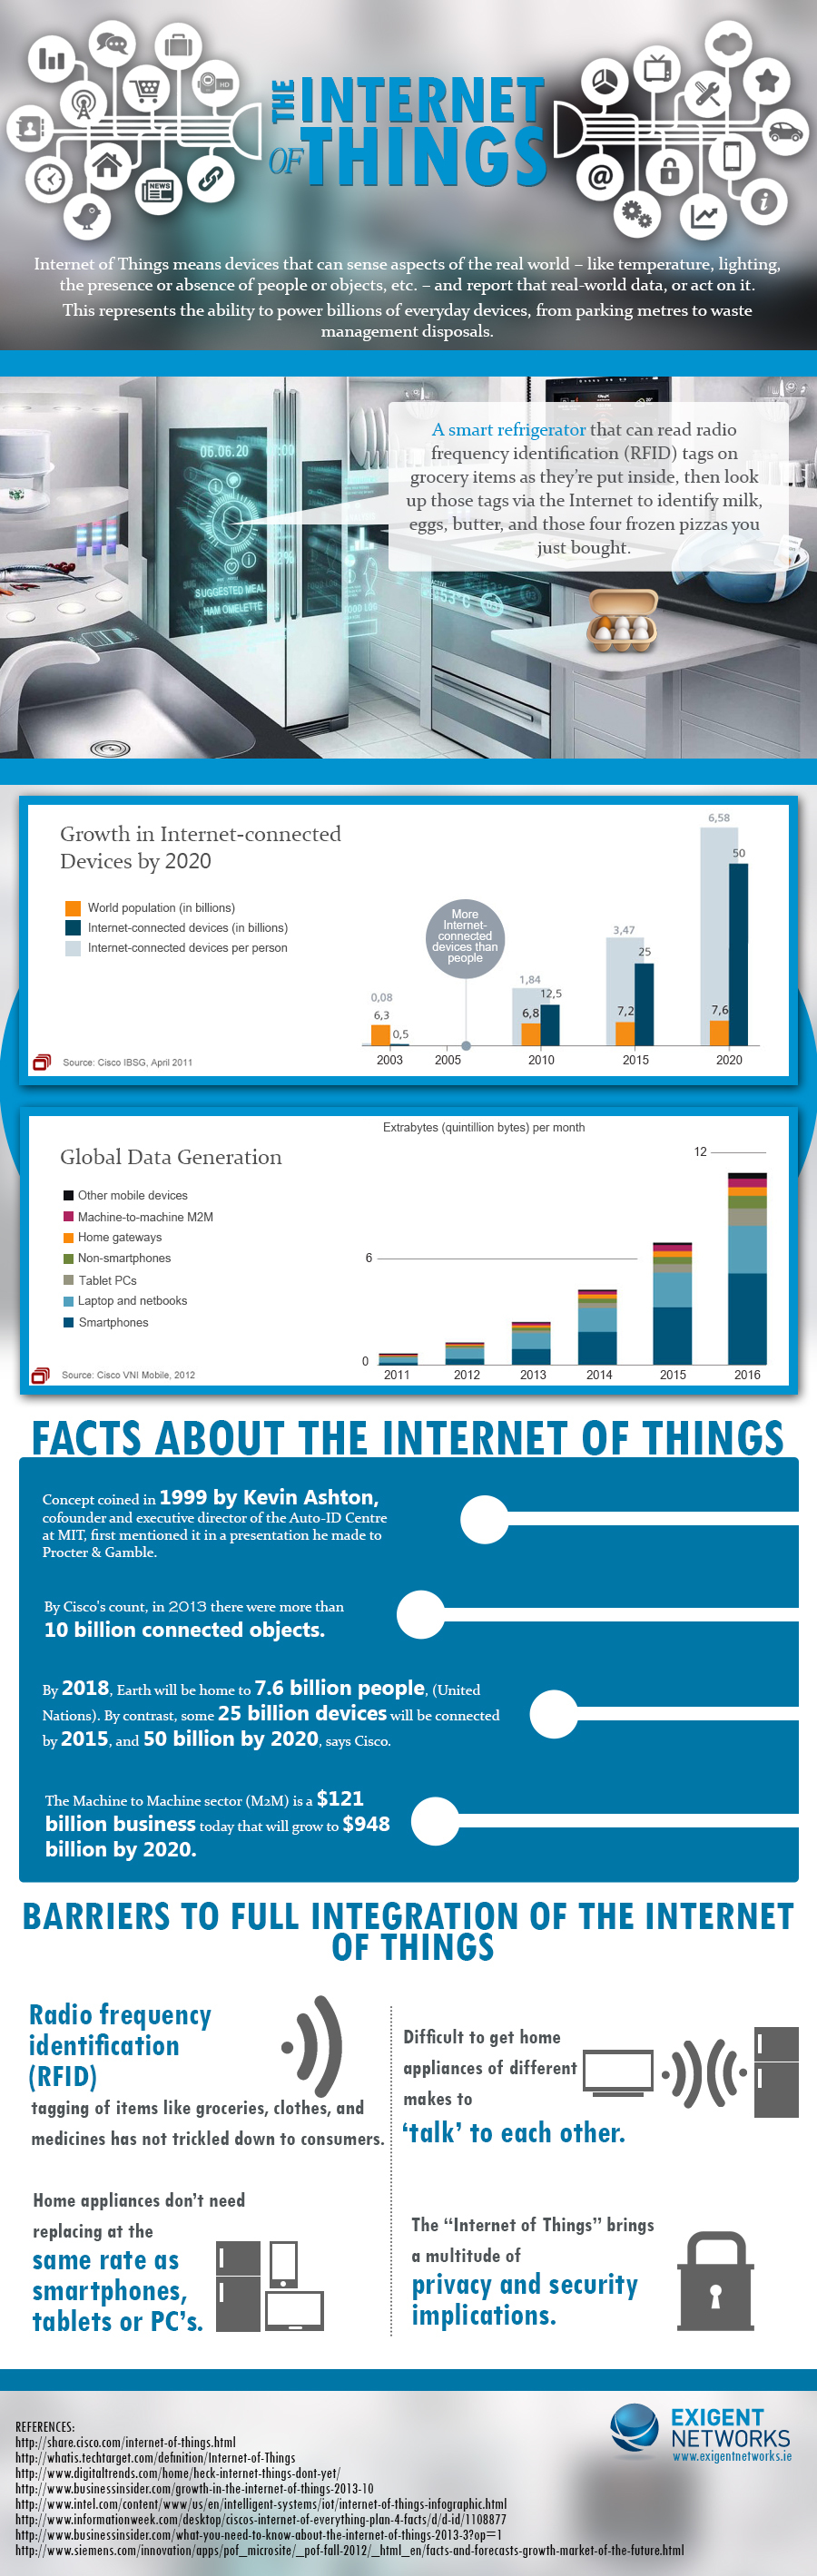 Internet of things infographic by Exigent Networks